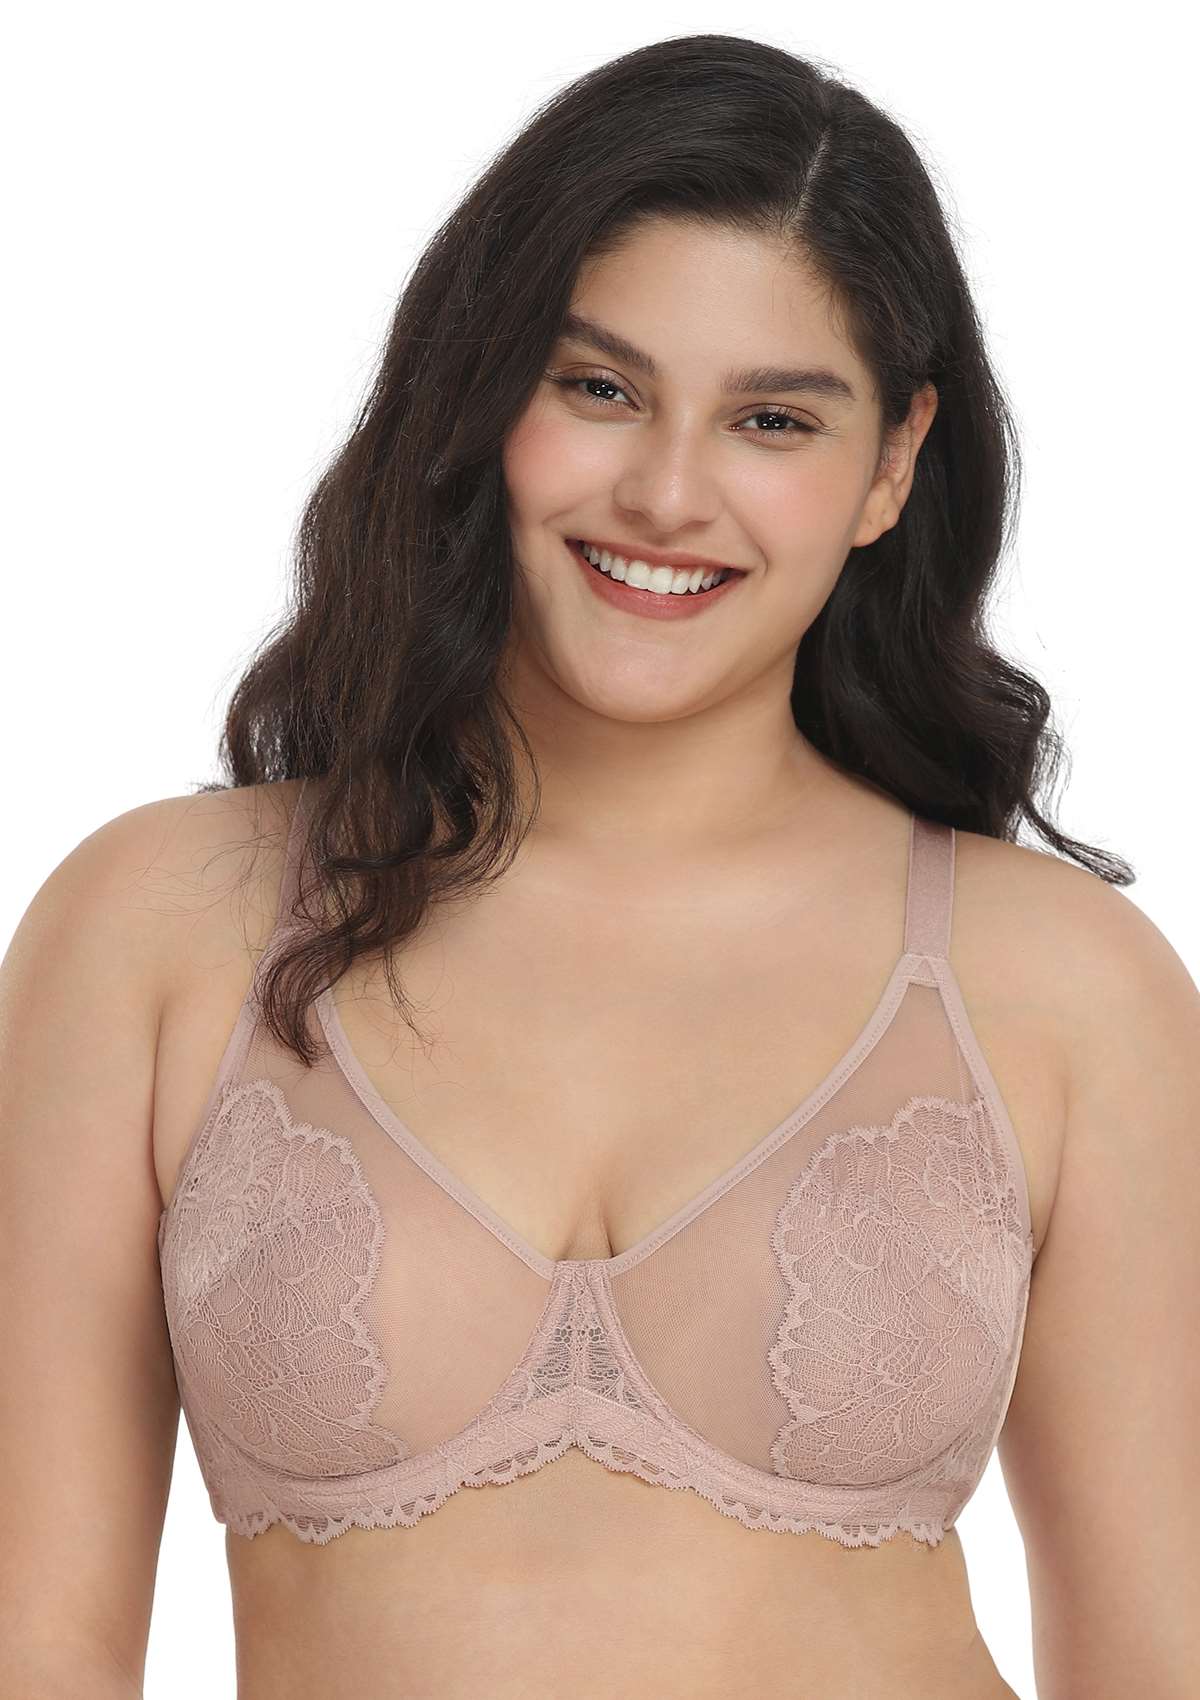 HSIA Blossom Lace Bra And Panties Set: Best Bra For Large Busts - Dark Pink / 38 / DD/E